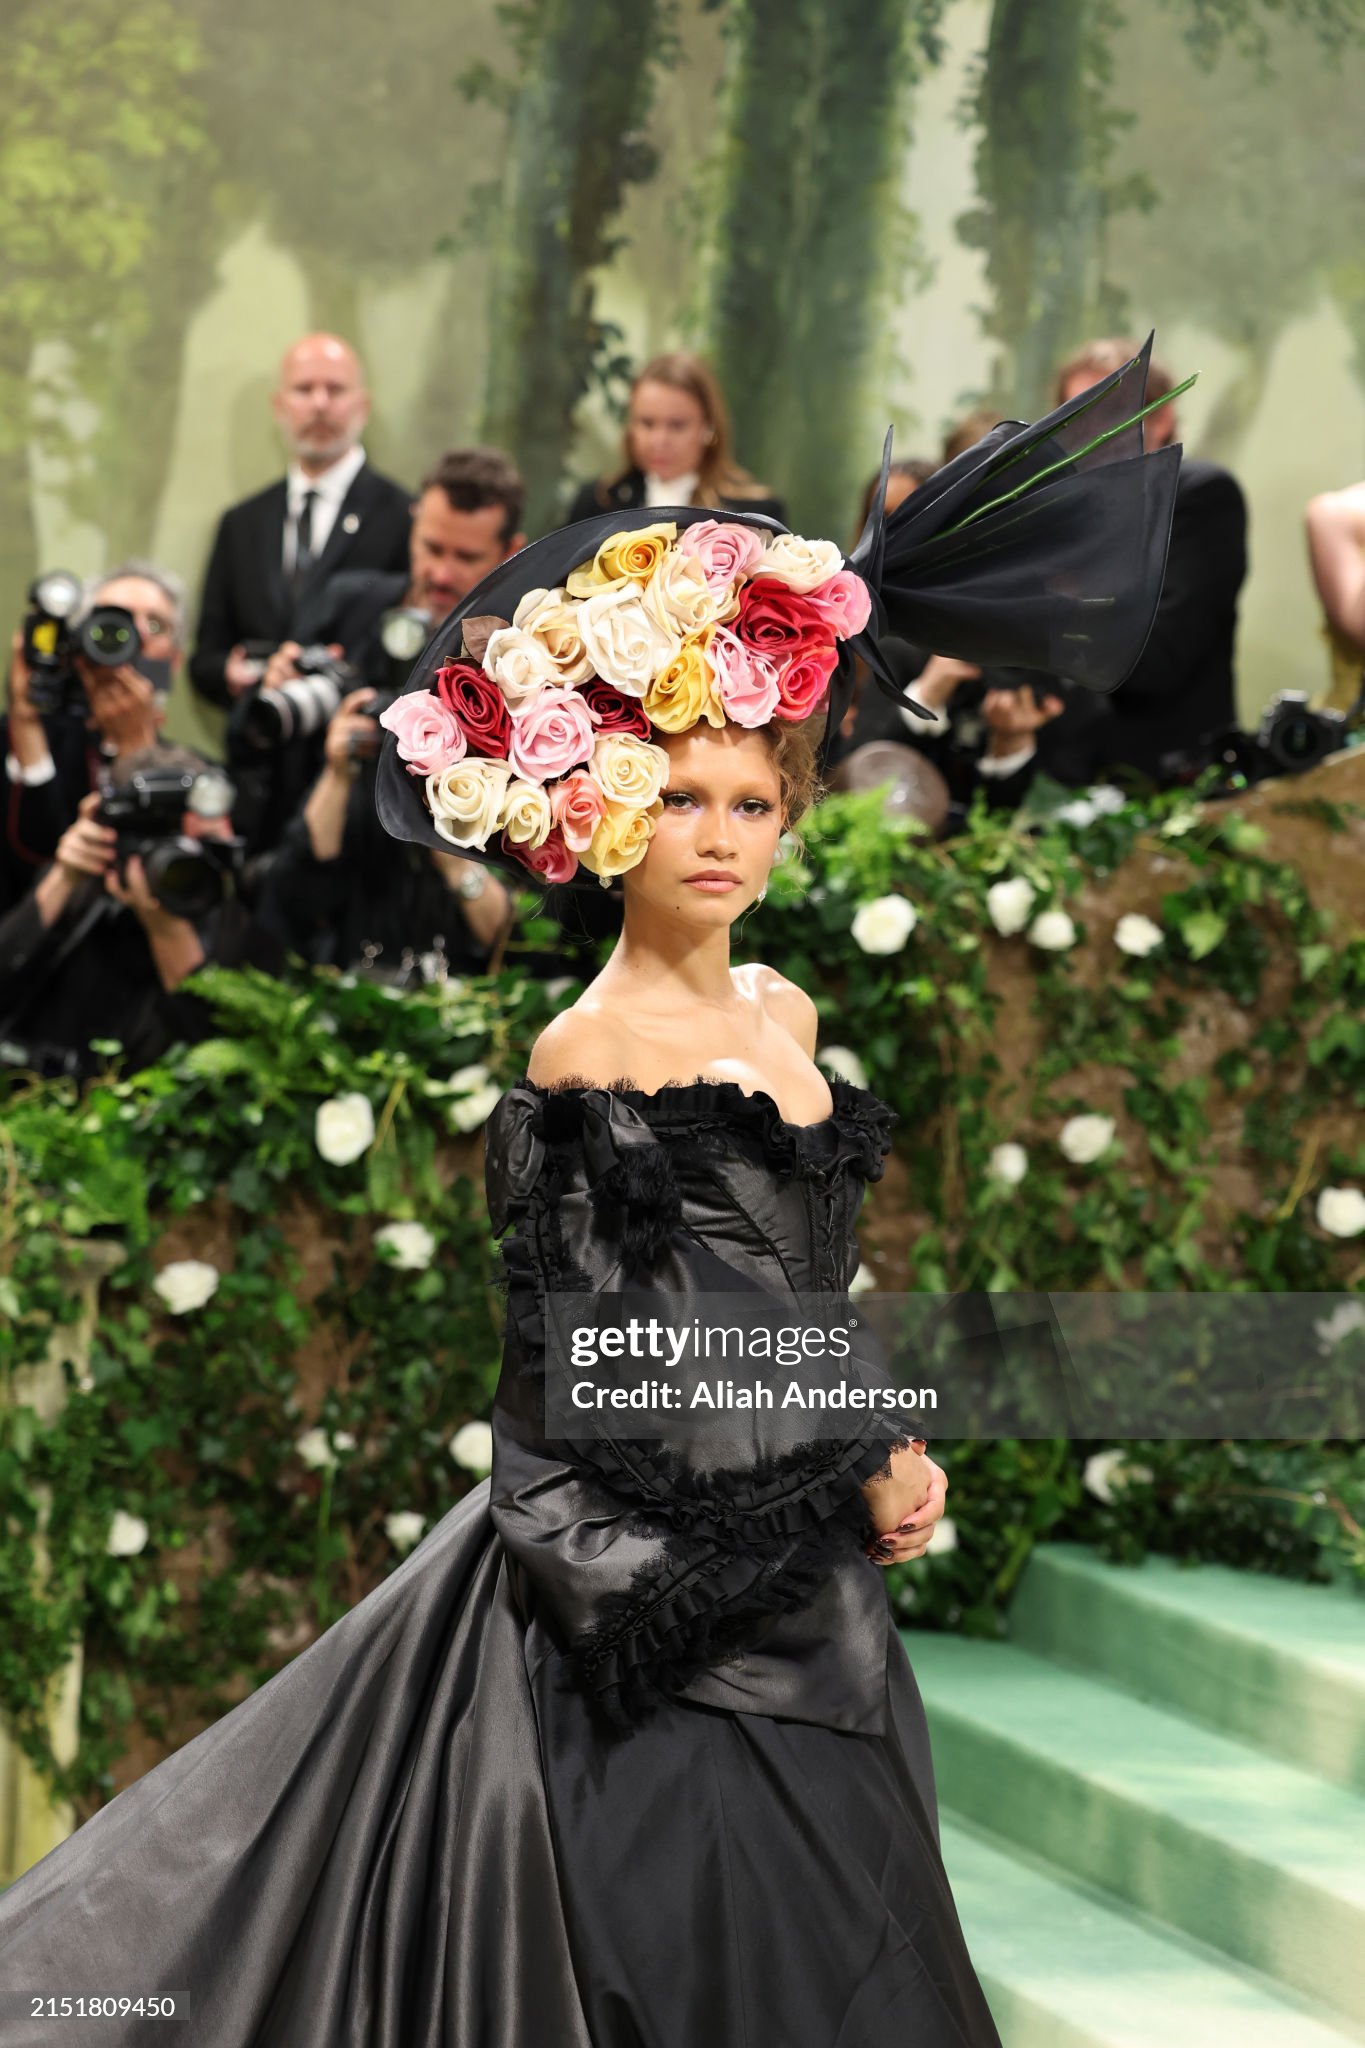 gettyimages-2151809450-2048x2048.jpg